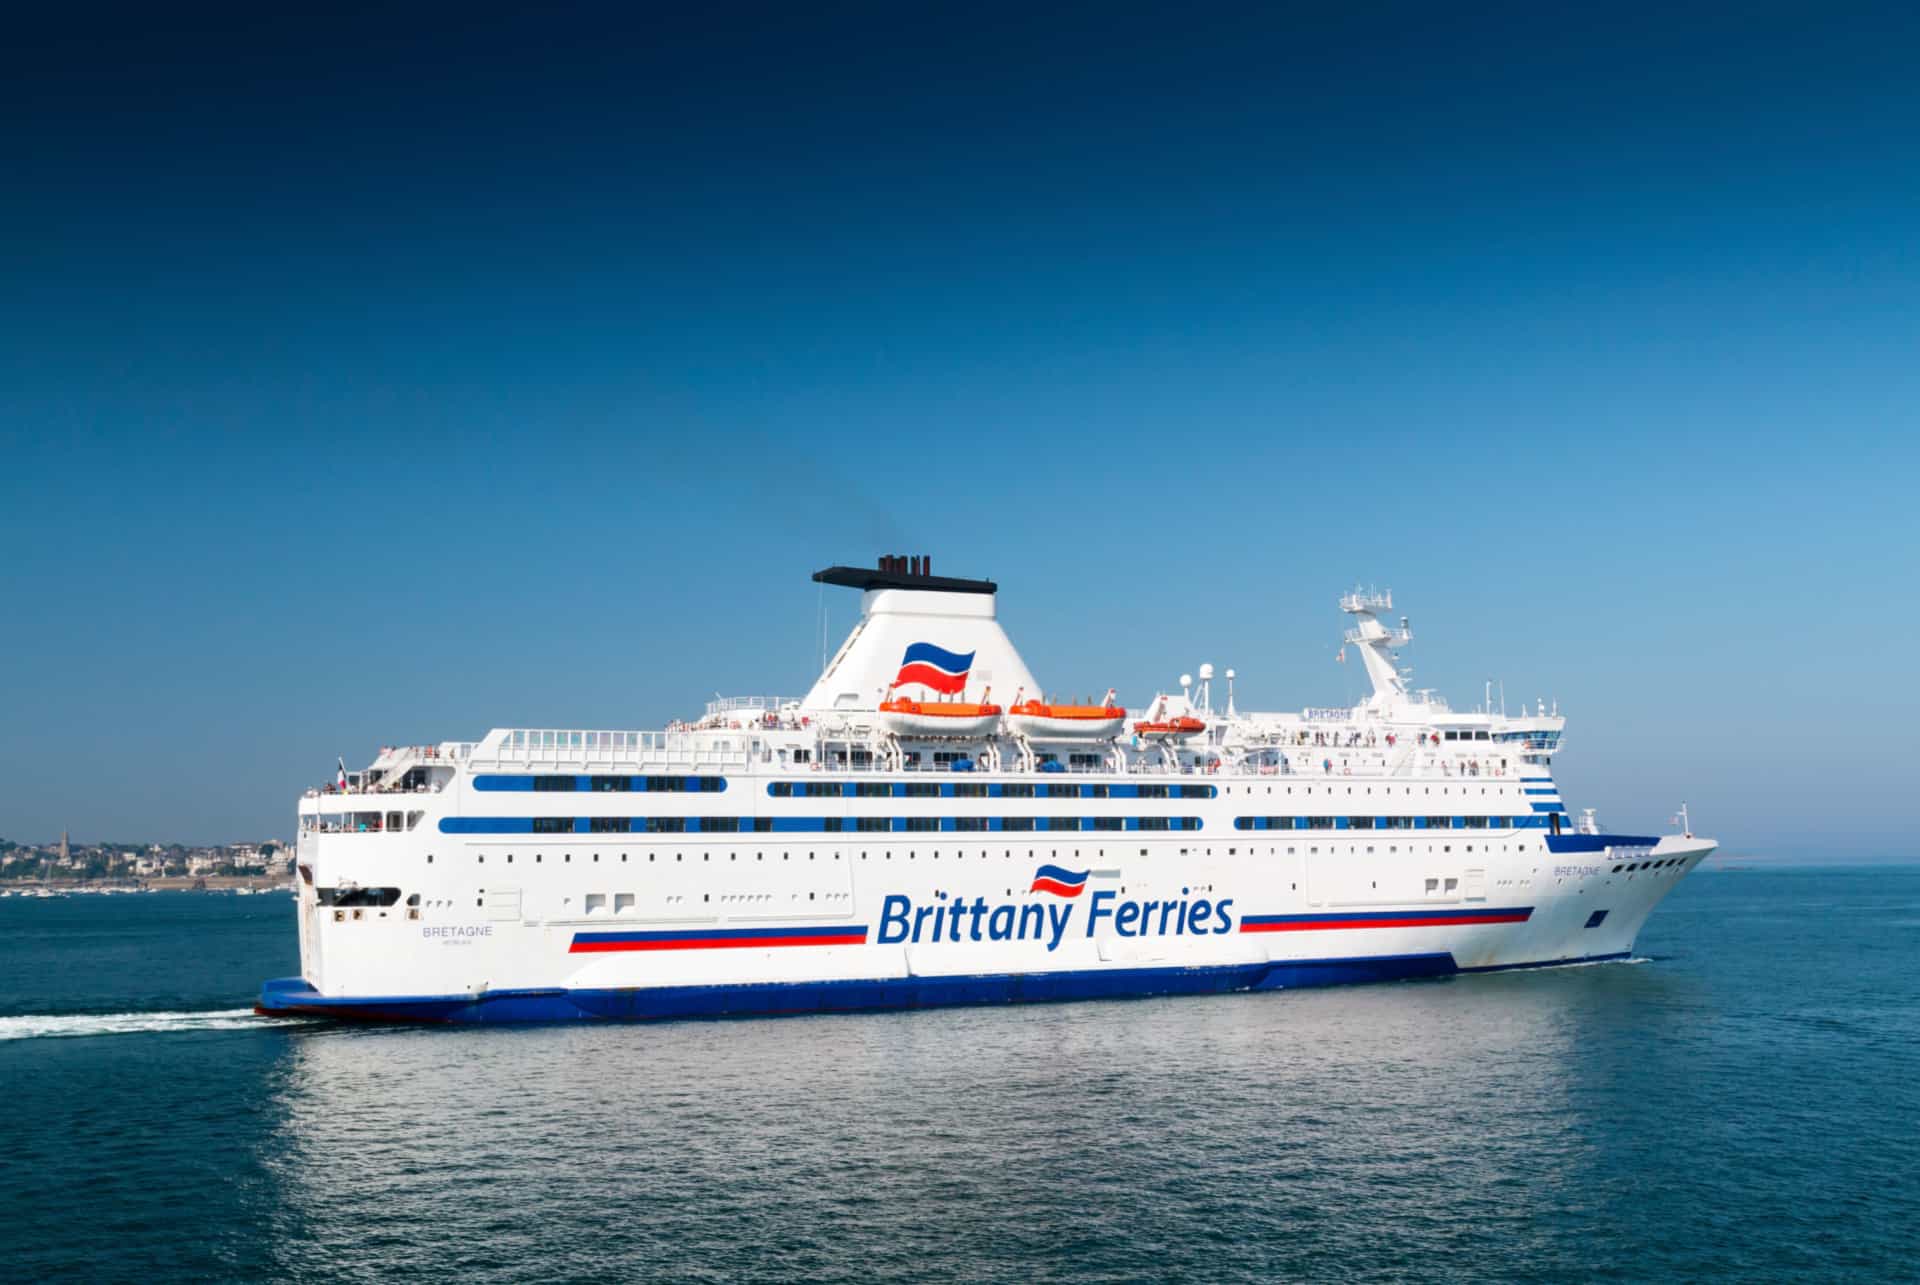 brittany ferries